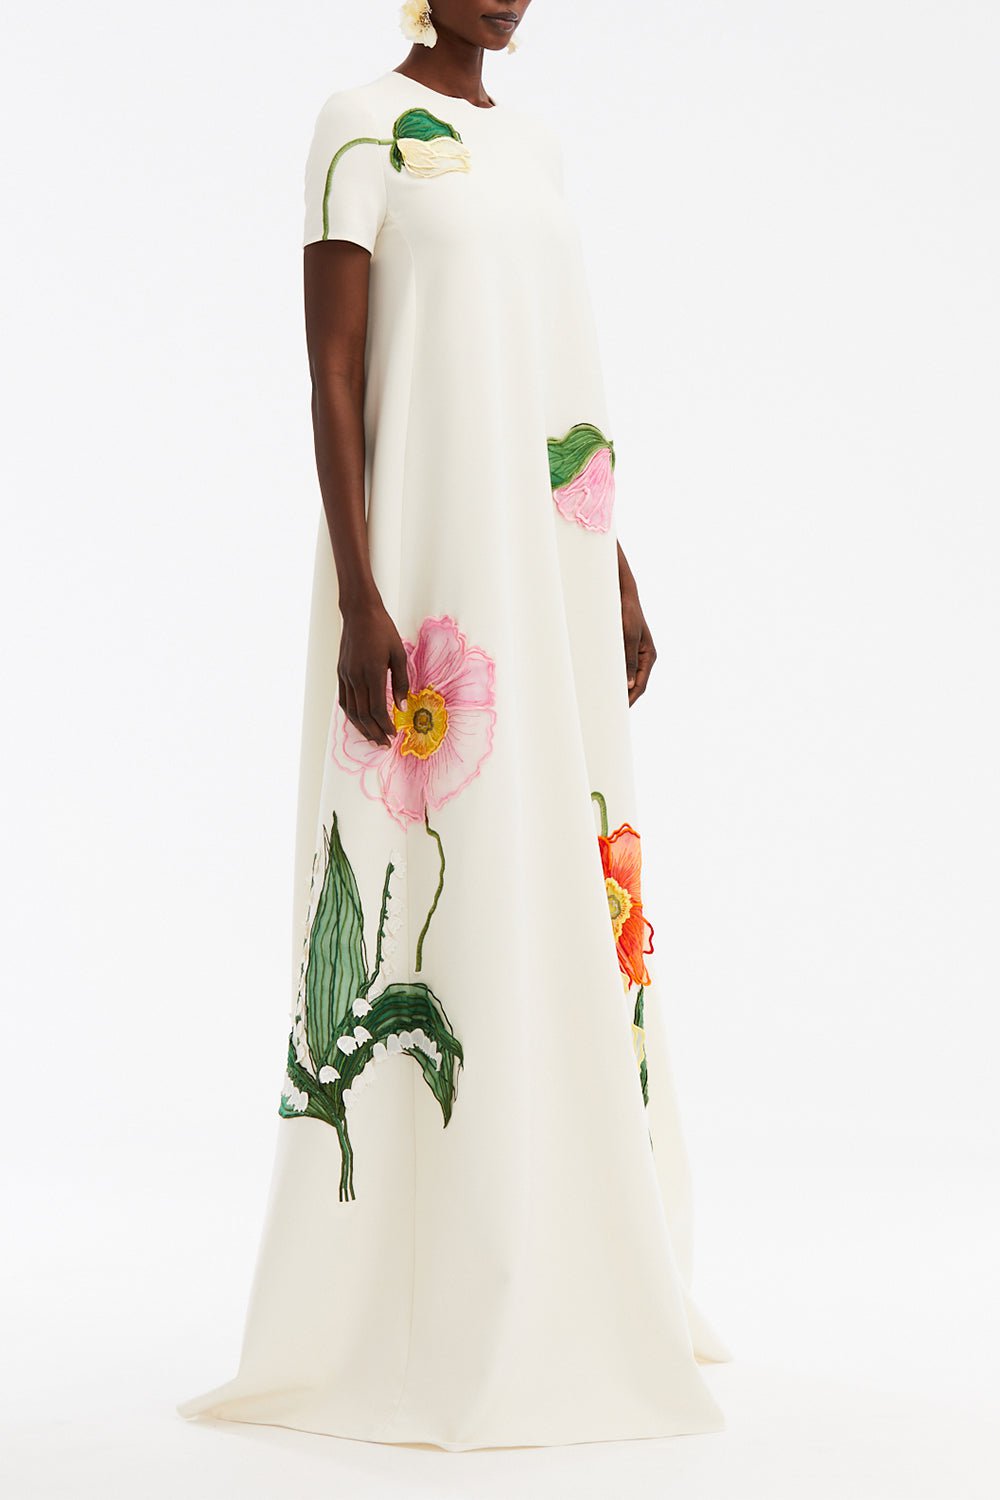 OSCAR DE LA RENTA-Painted Poppies Embroidered Gown-IVORY